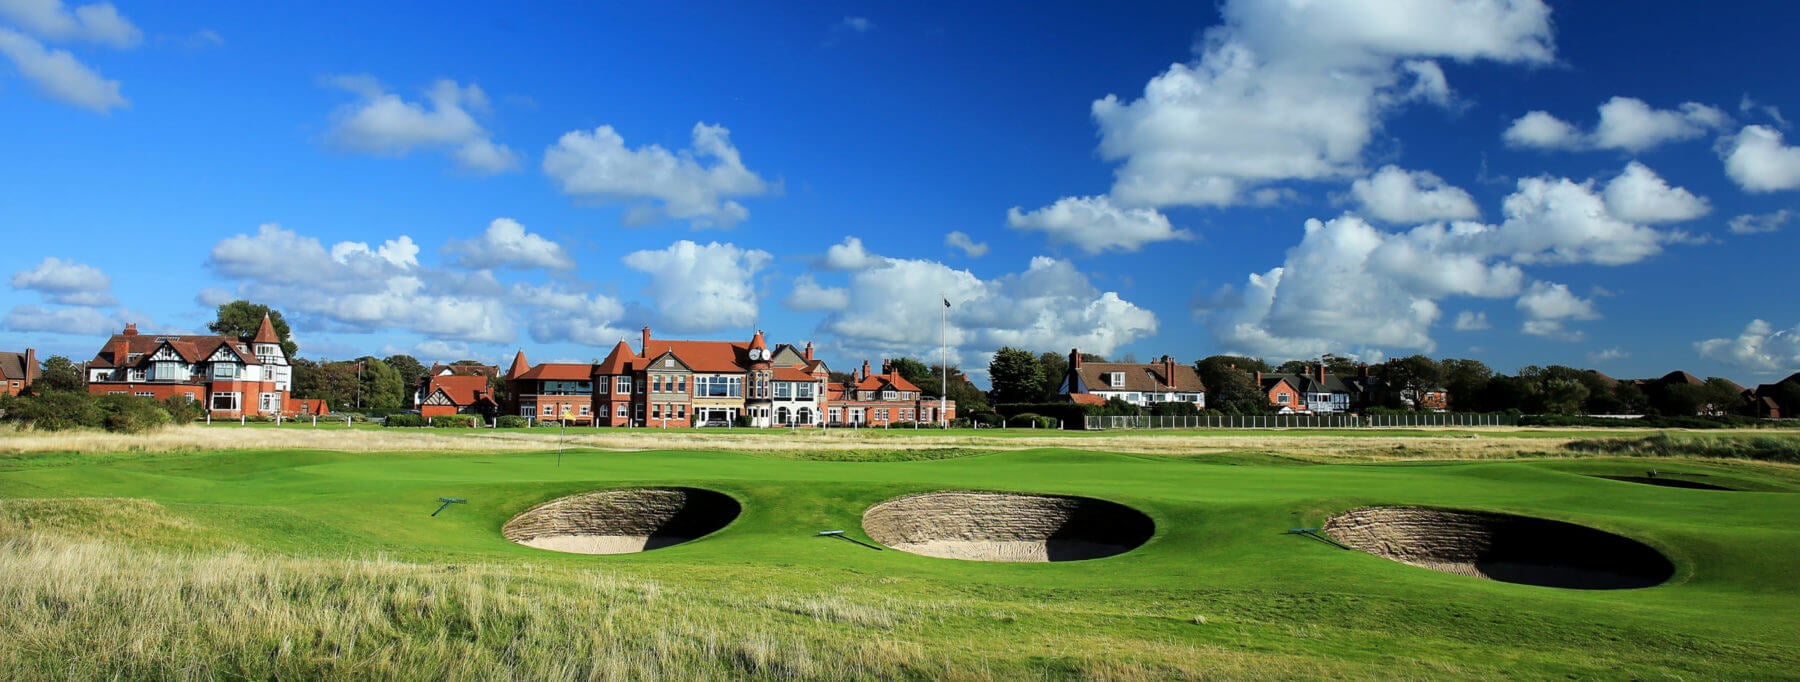 Landscape view of the Royal Liverpool clubhouse and nearby pot bunkers